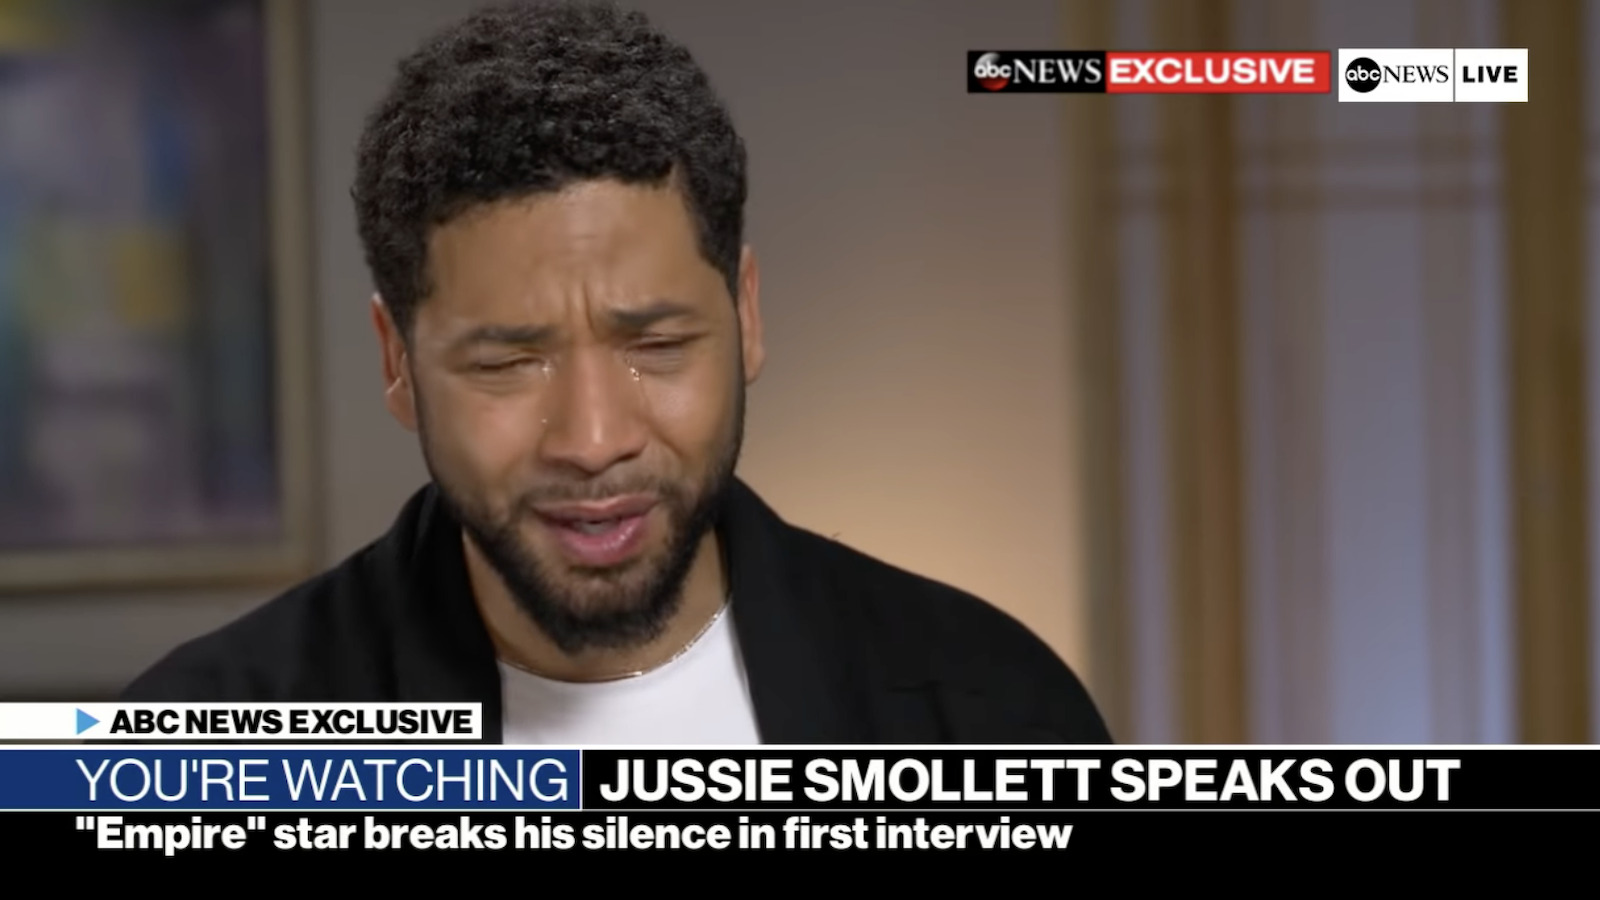 Jussie Smollett is moved to tears during his first post-hate crime interview via ABC News